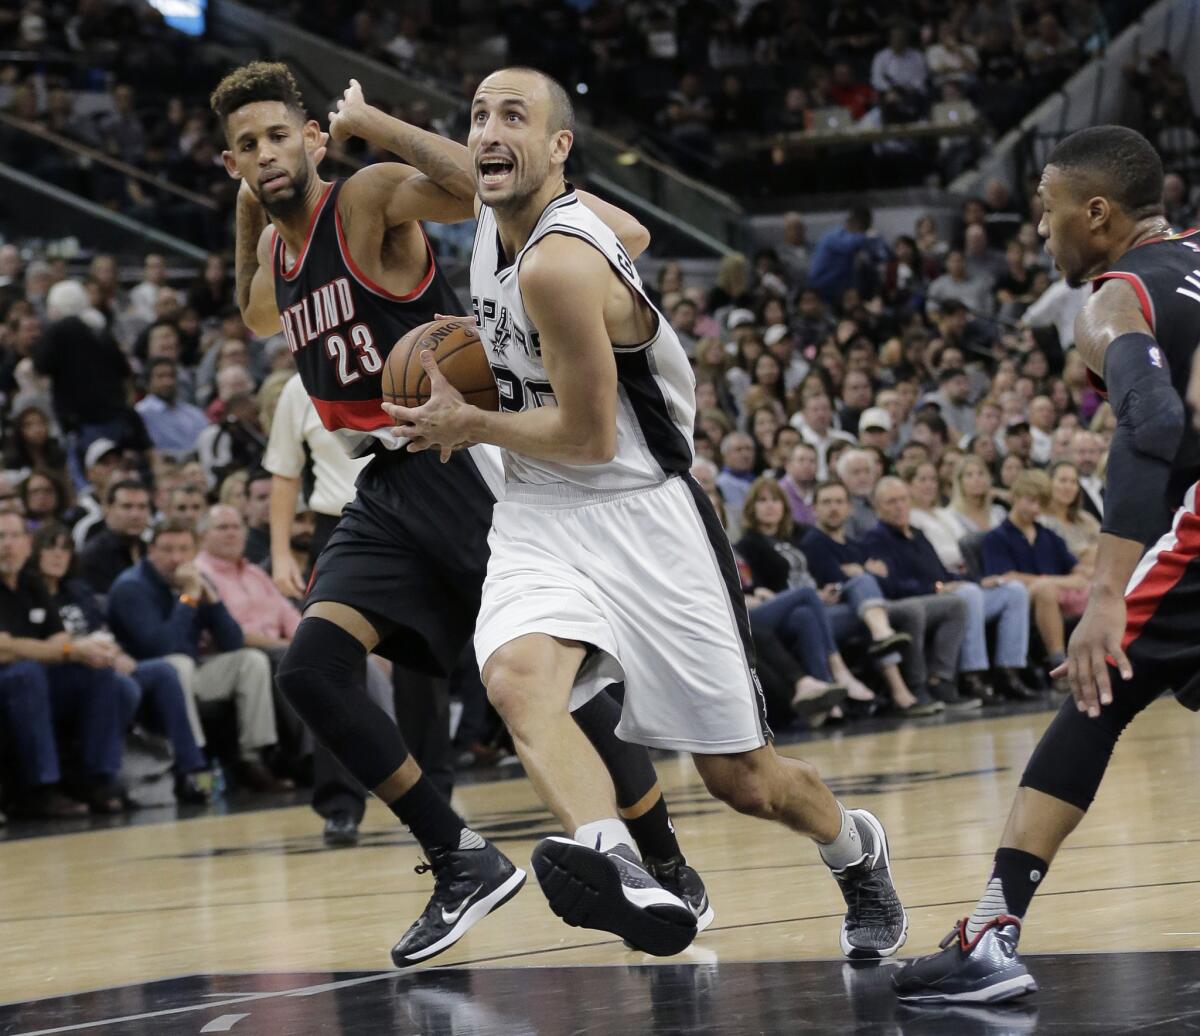 Spurs guard Manu Ginobili drives past Trail Blazers forward Allen Crabbe (23) to score during the second half.